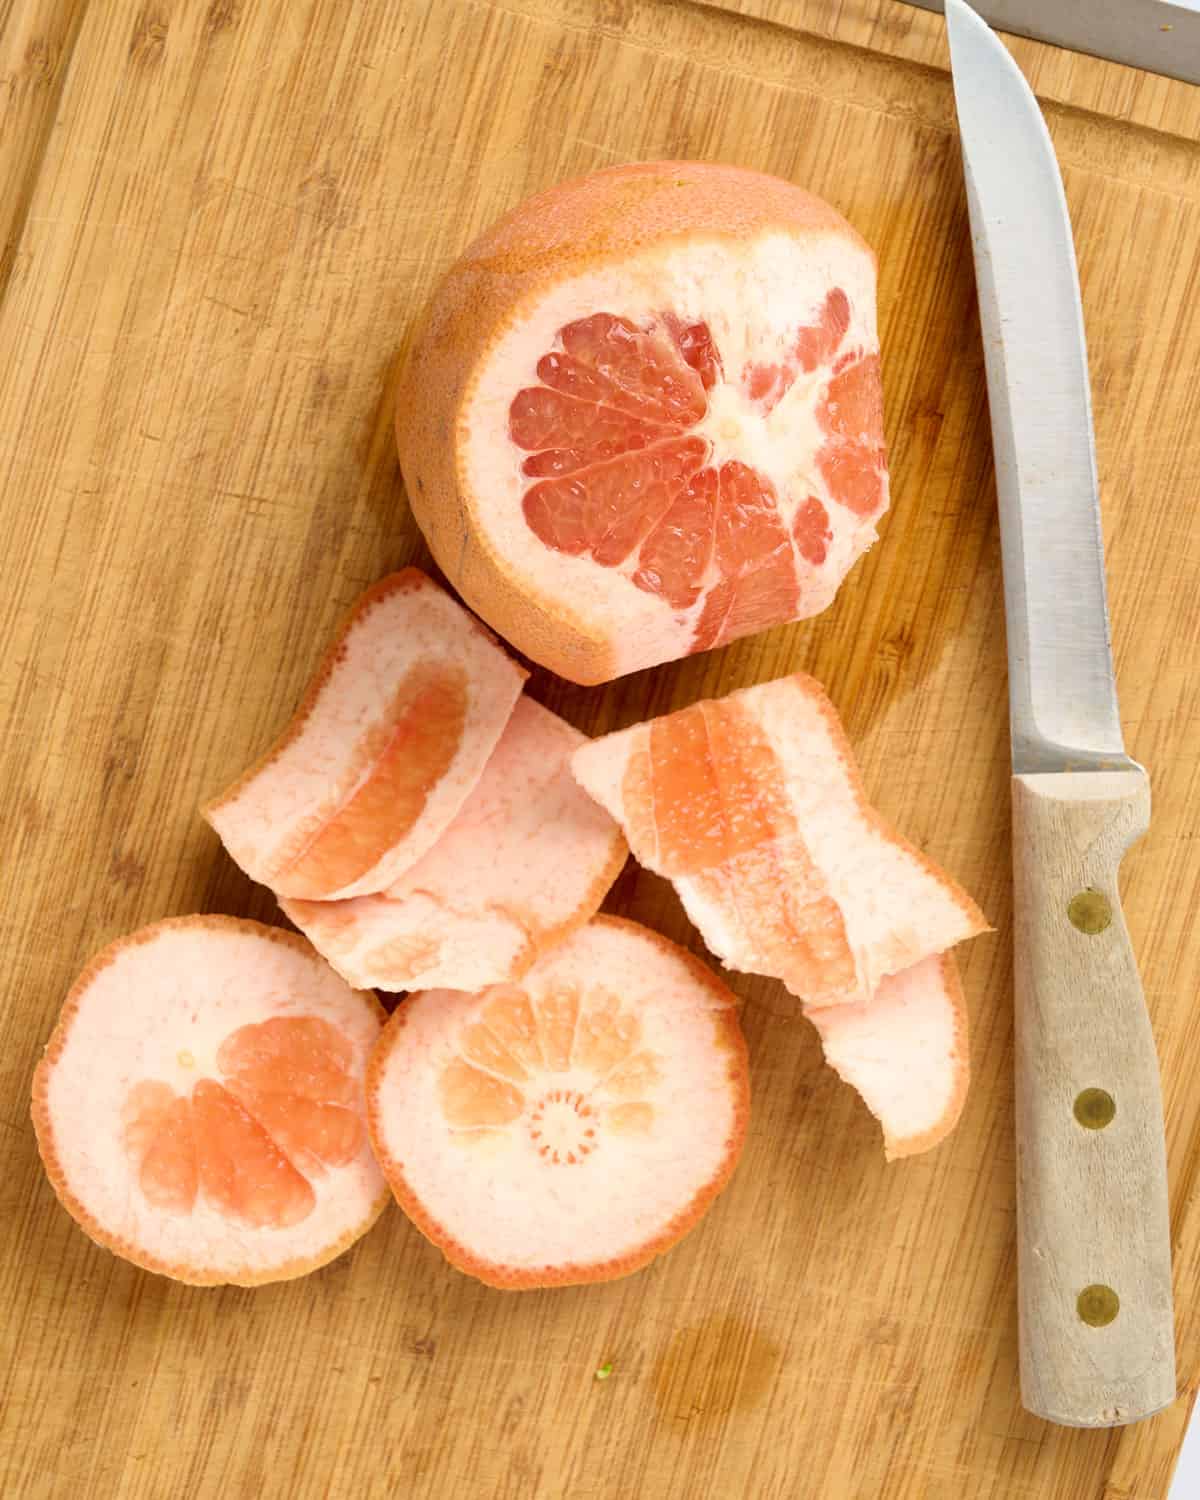 A grapefruit with some of the peel removed on a cutting board.